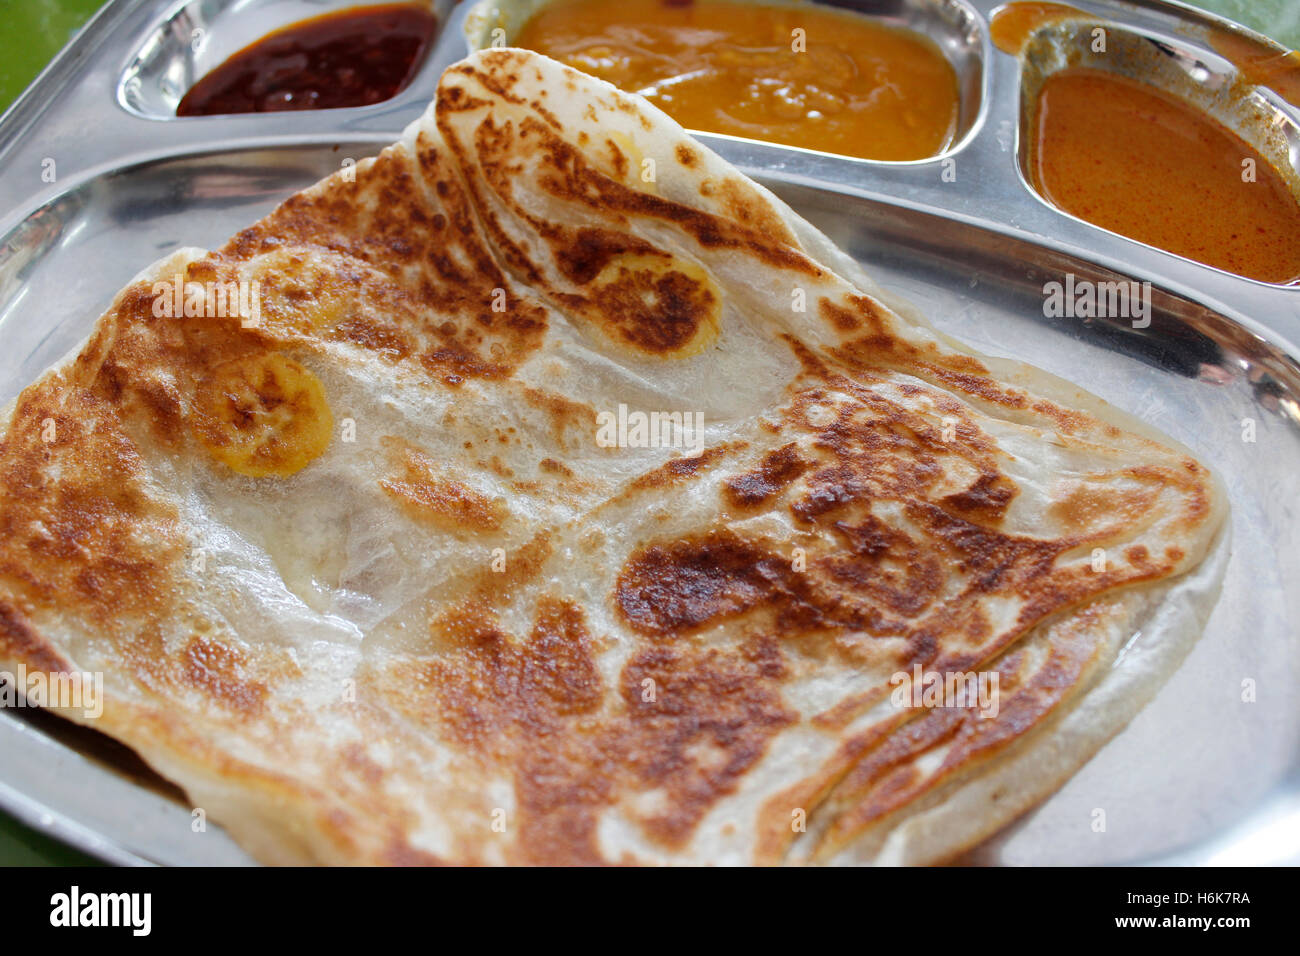 Roti canai or pan fried flatbread consisting of dough, egg, ghee and banana with the three accompanying sauces Stock Photo